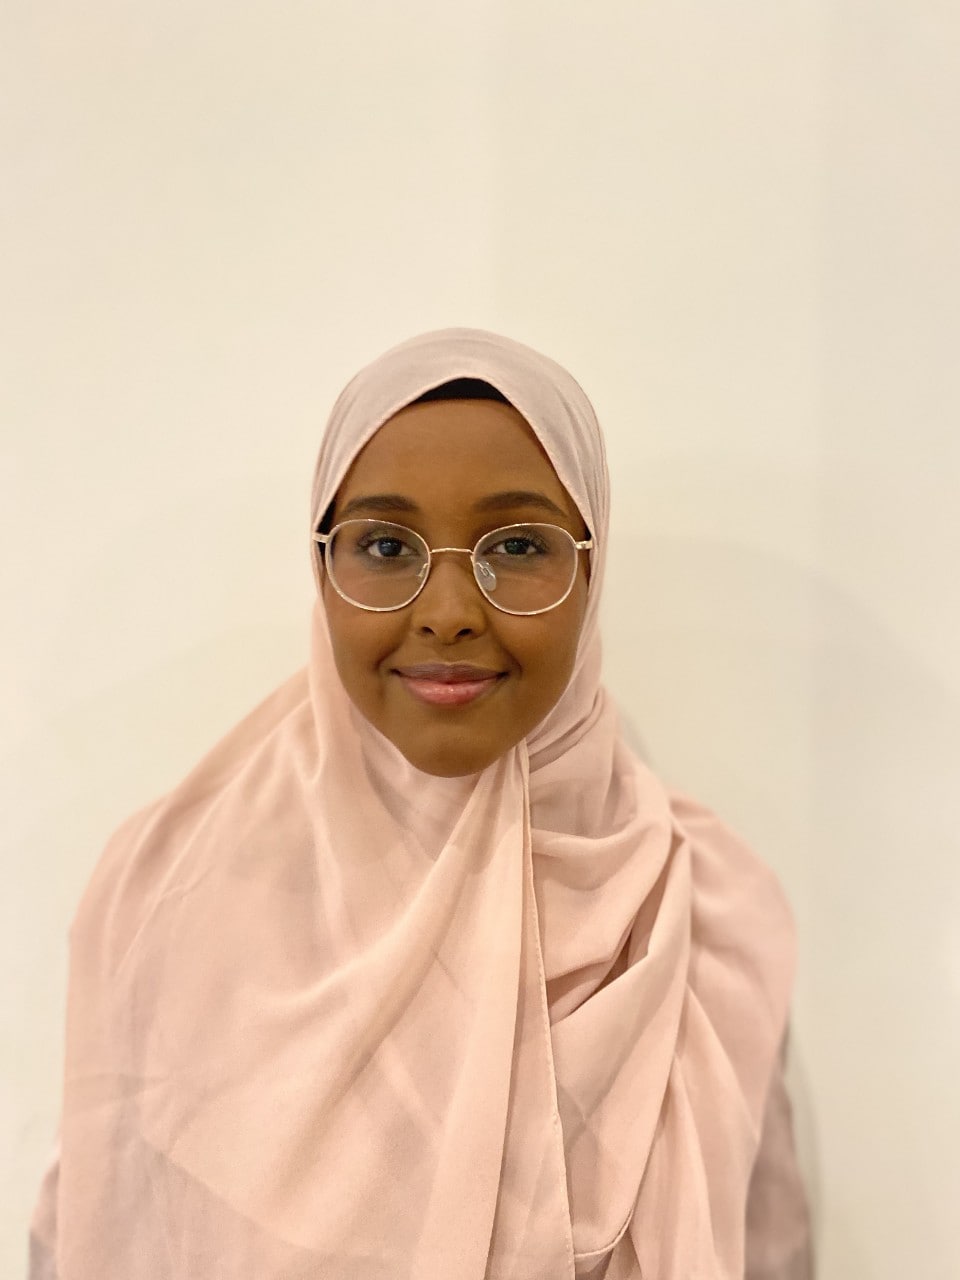 Mariam is looking directly at the camera and is wearing a matching pale pink shirt and headscarf. She is smiling